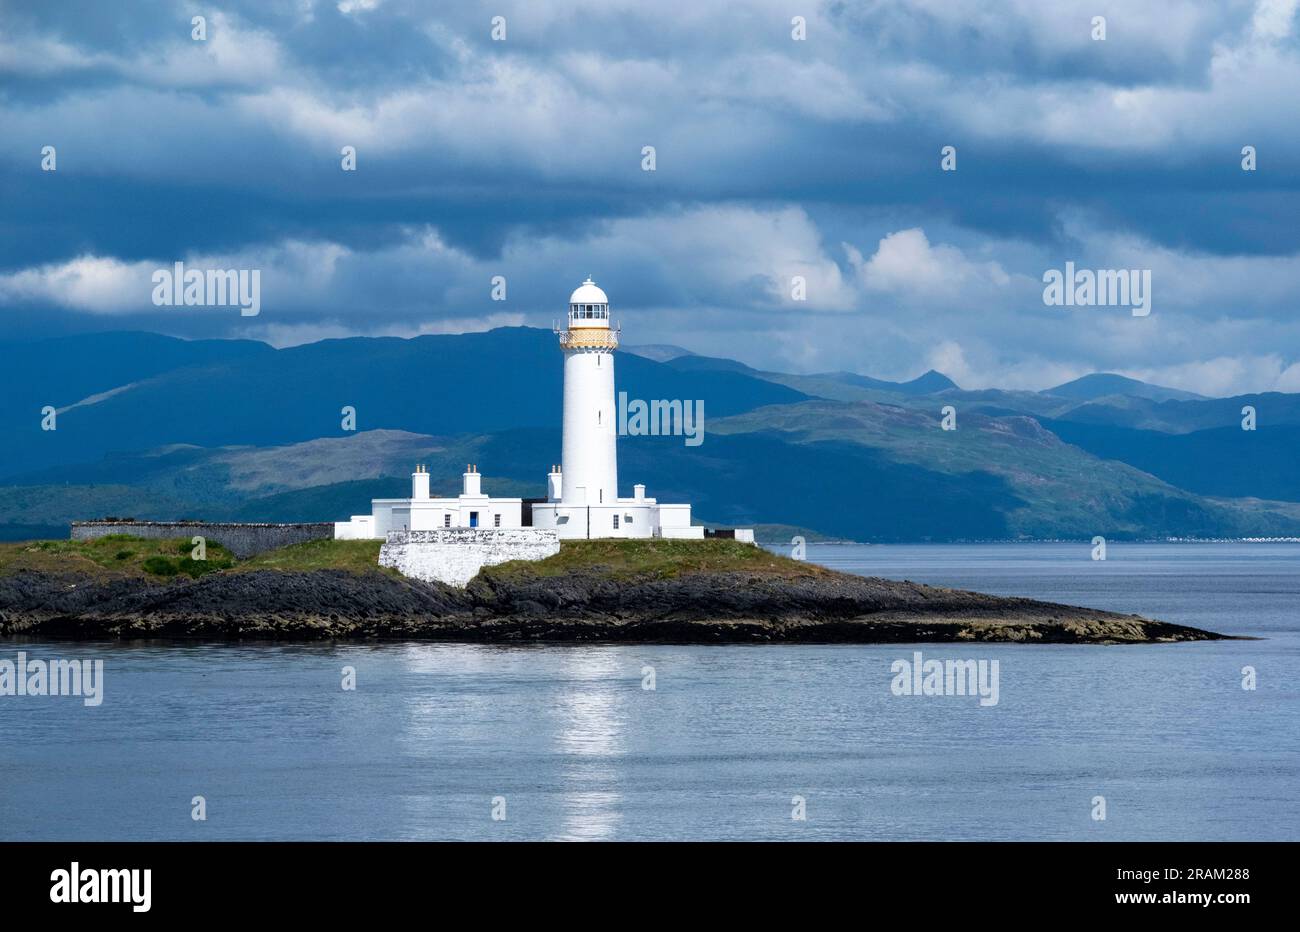 View of Lismore Lighthouse. Built by Robert Stevenson in 1833 and is situated on Eilean Musdile in the Firth of Lorne at the entrance to Loch Linnhe. Stock Photo